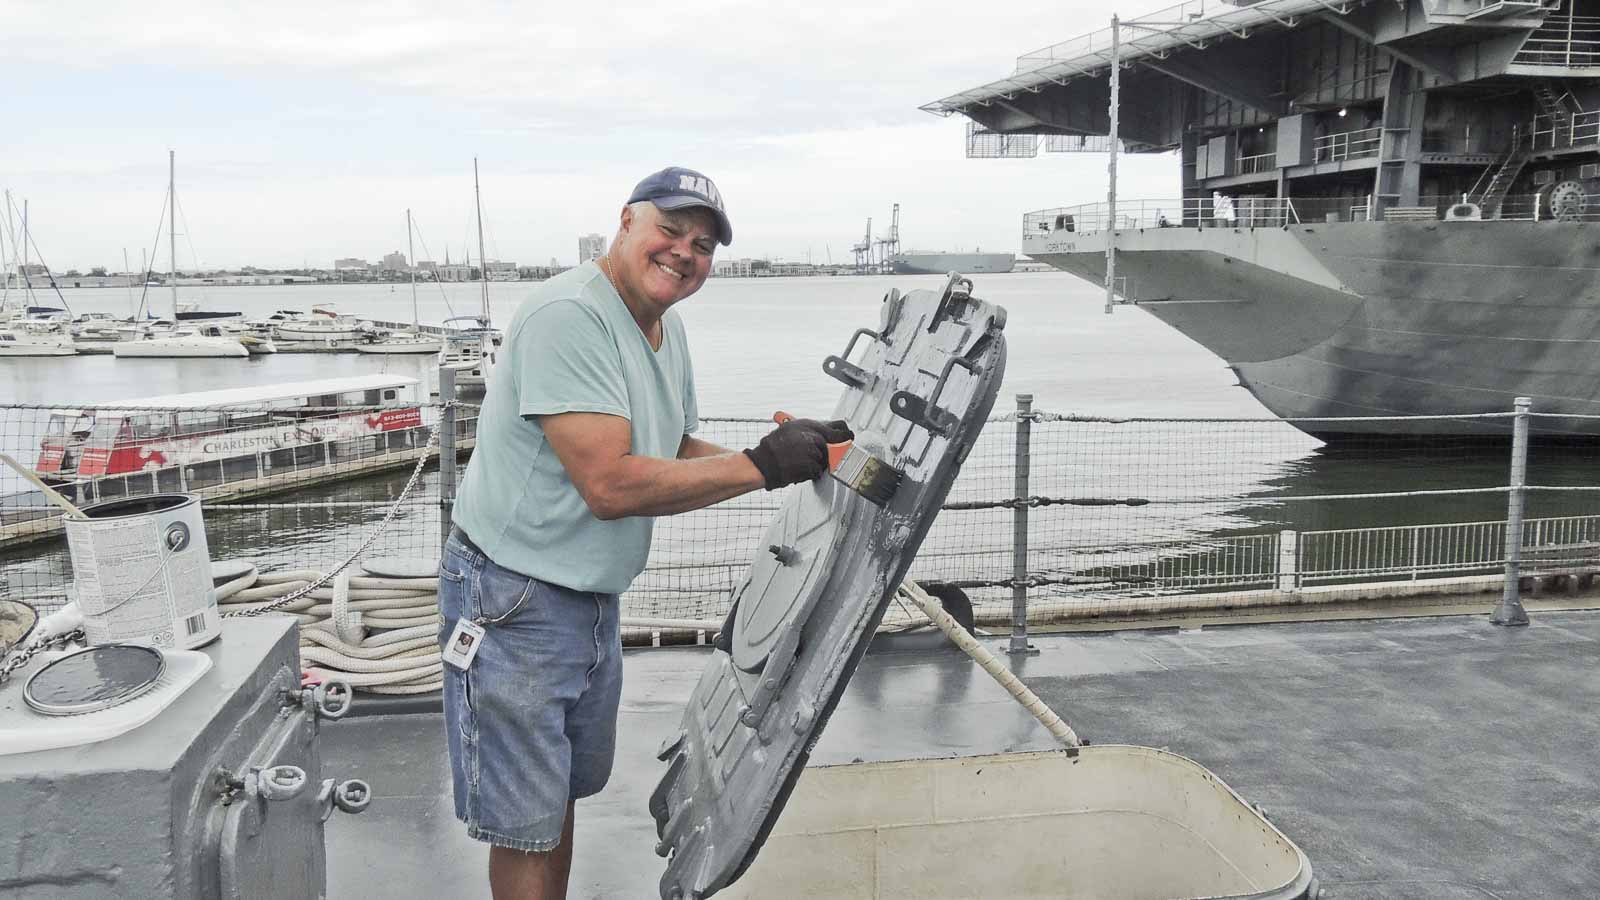 Man Painting The Equipment - Patriots Point Foundation